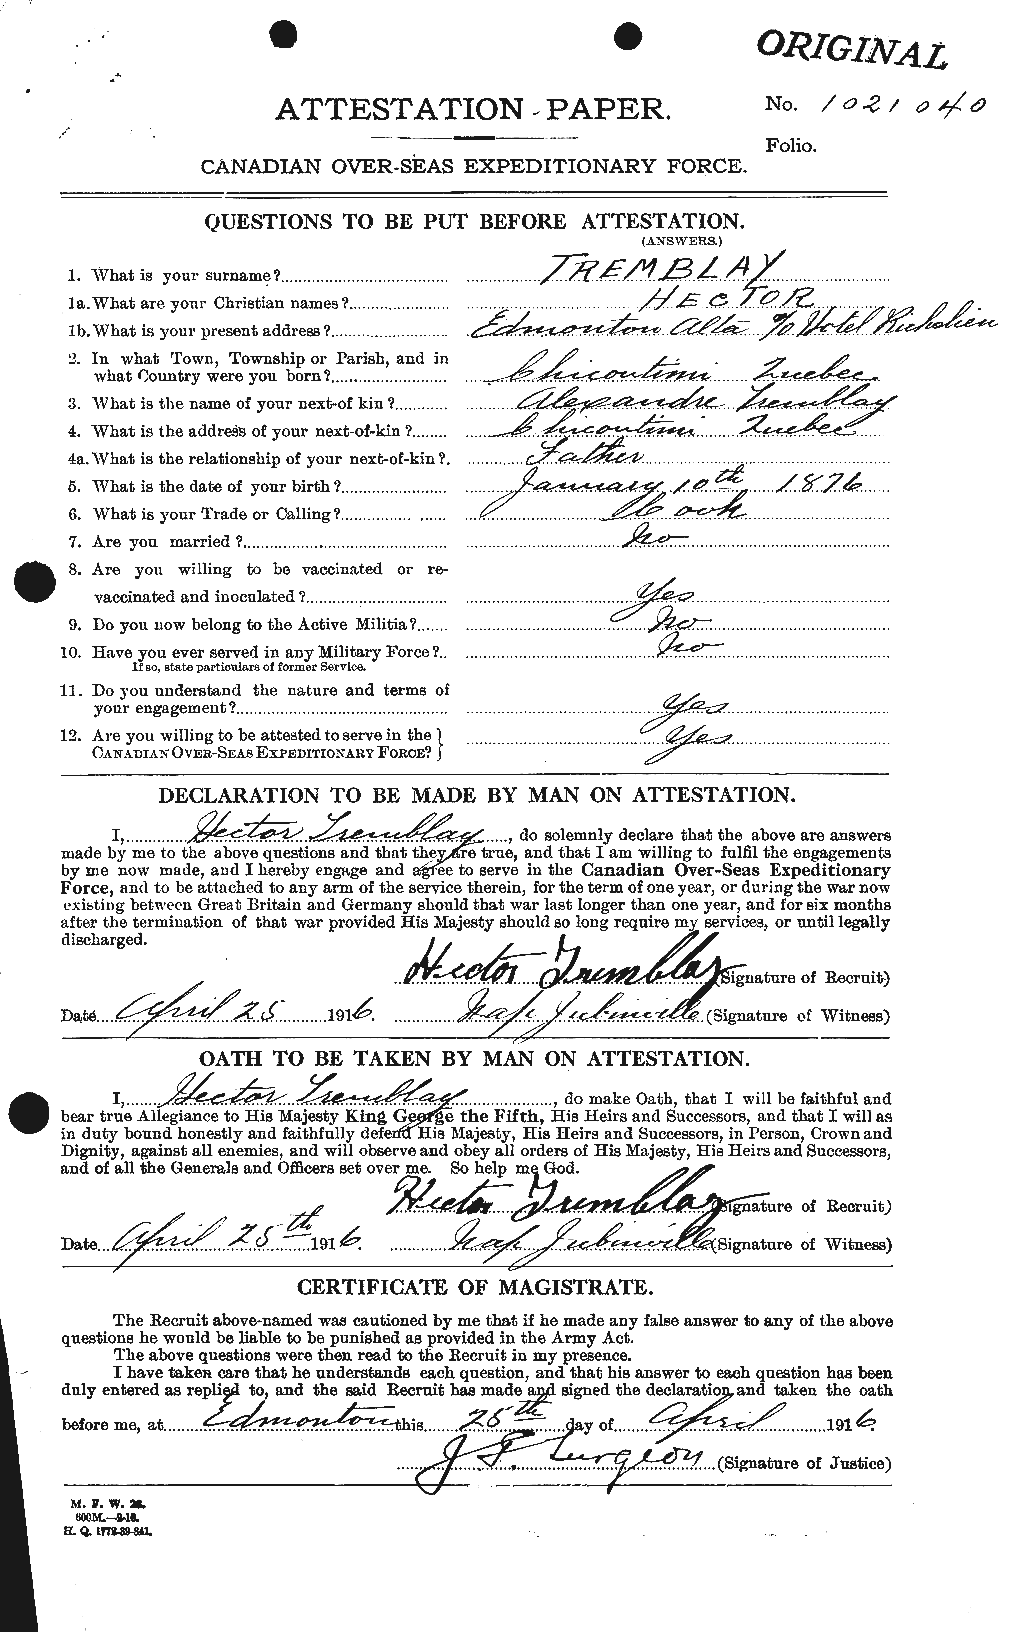 Personnel Records of the First World War - CEF 639077a